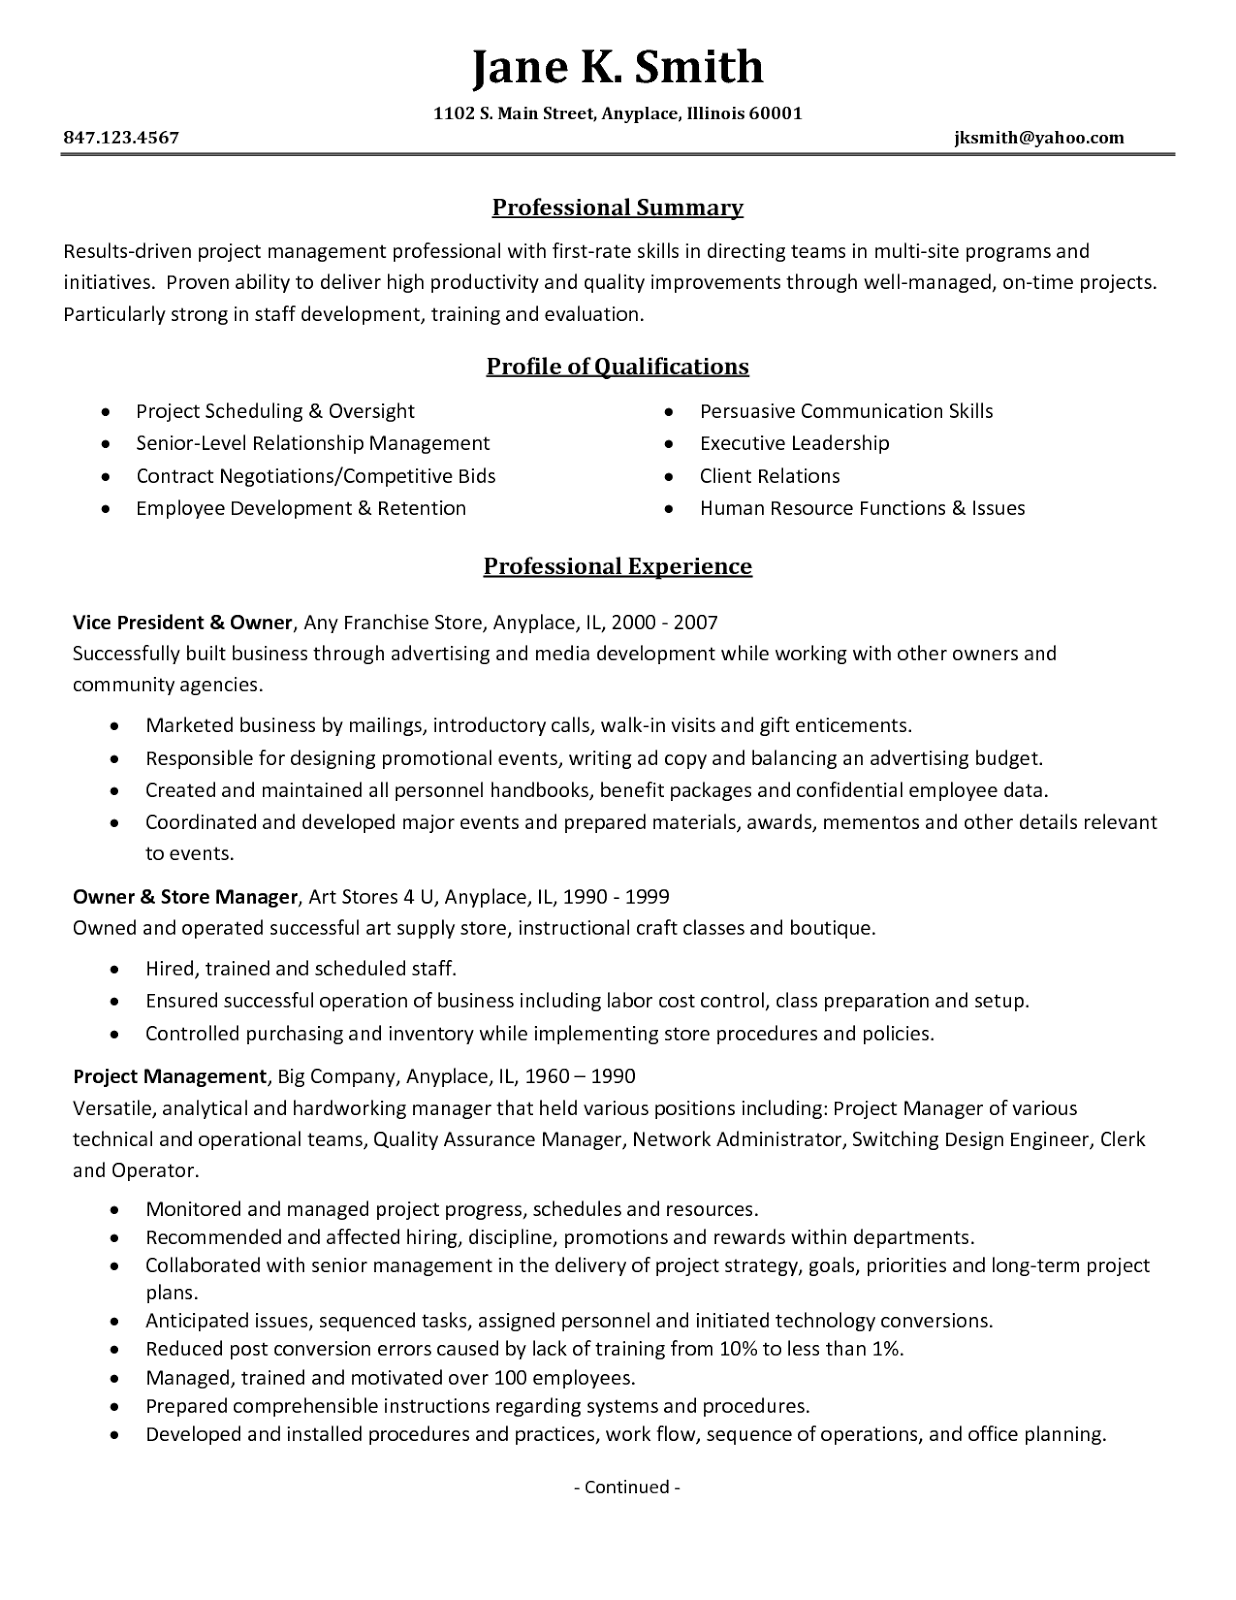 Resume management examples